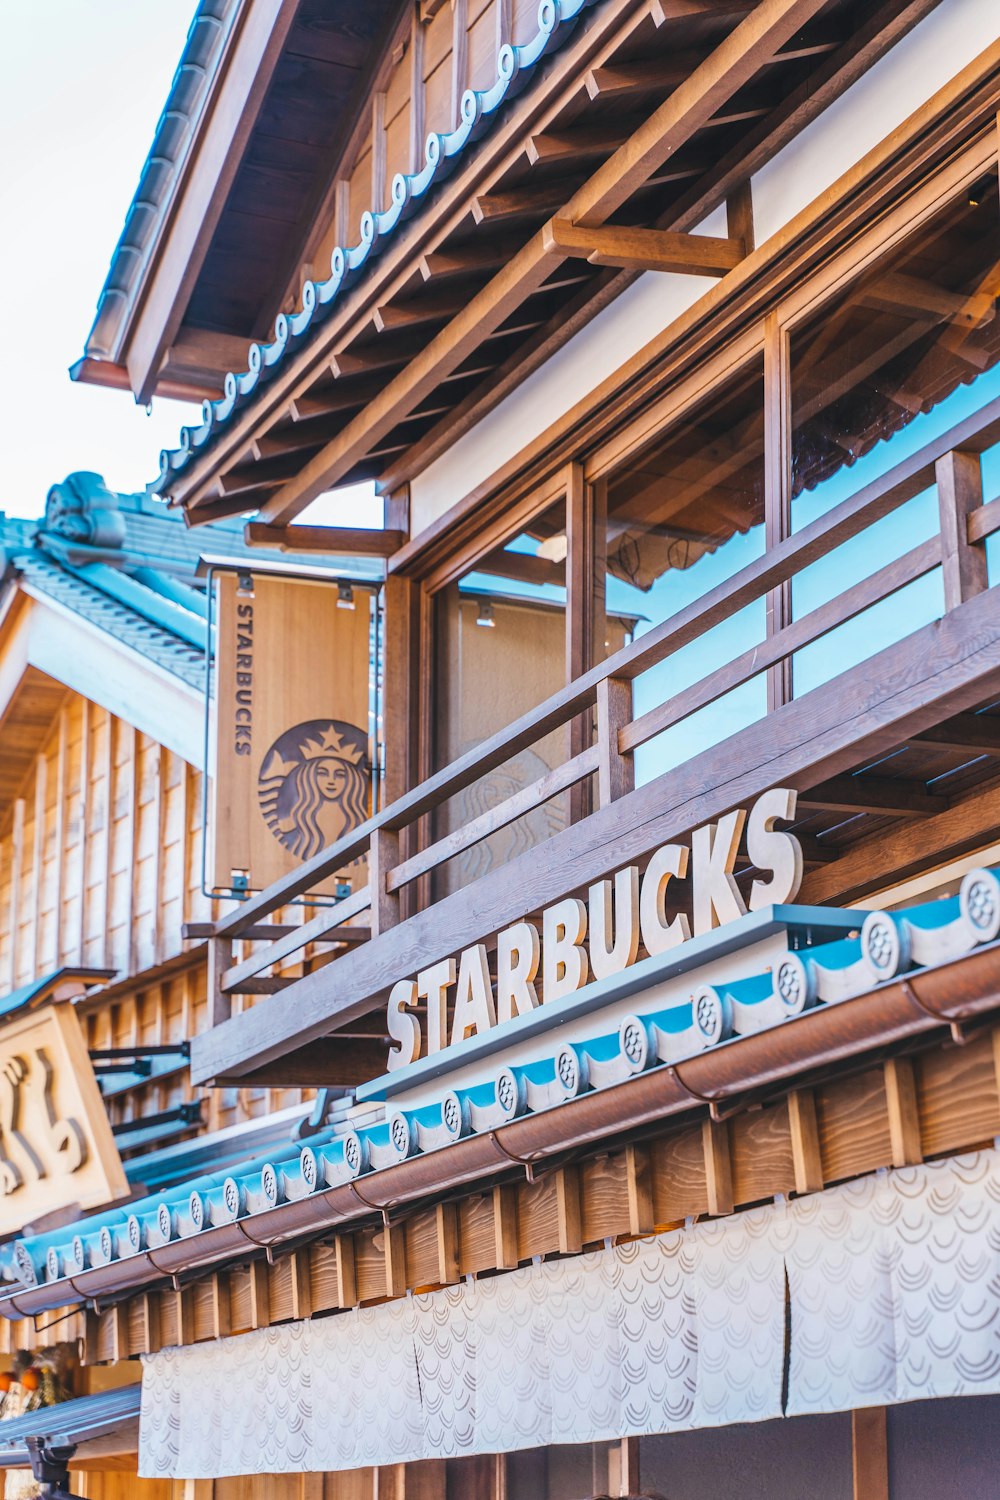 a building with a sign that says starbucks's on it